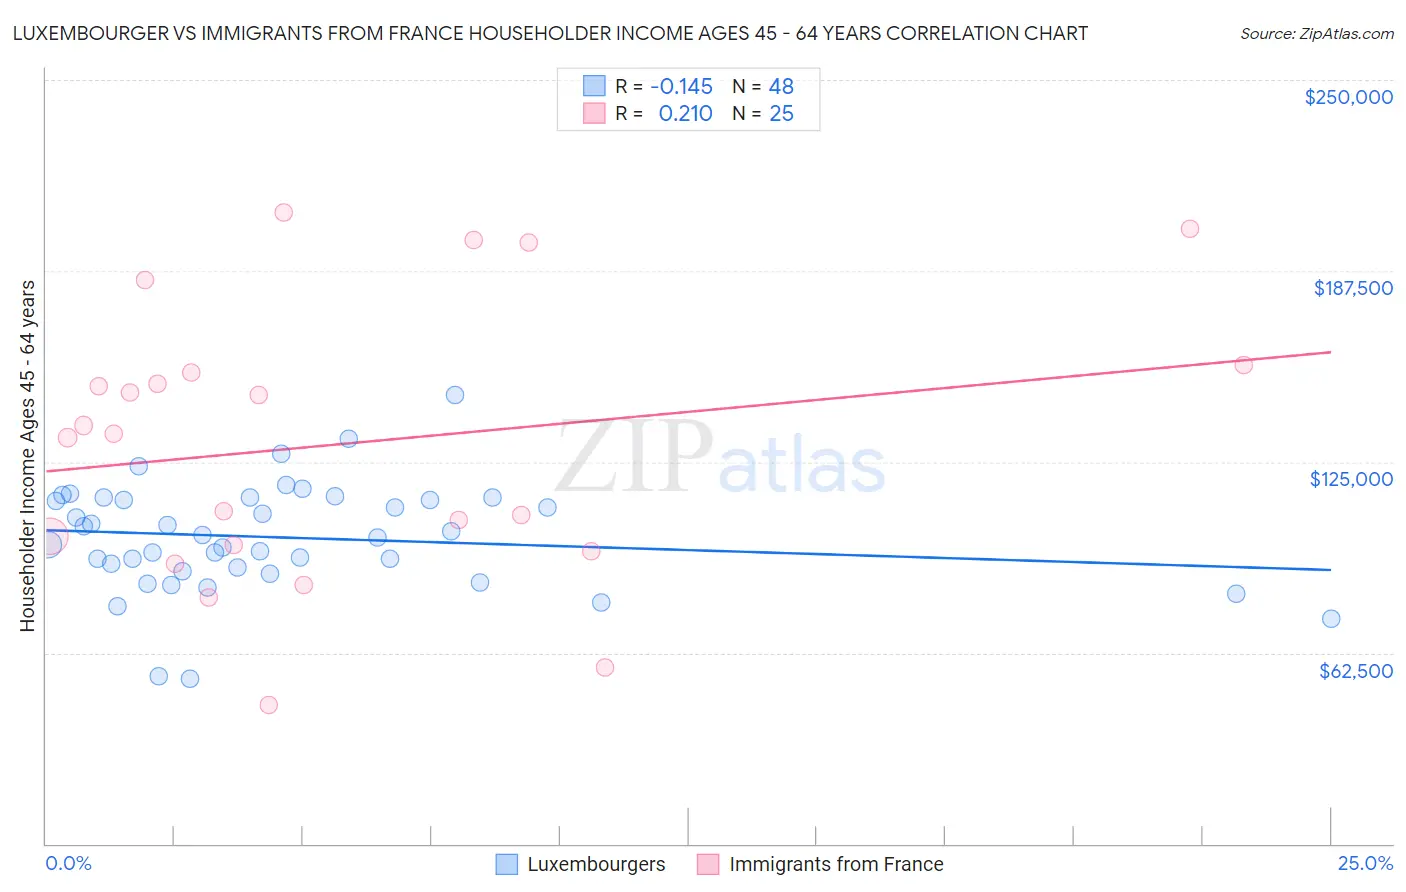 Luxembourger vs Immigrants from France Householder Income Ages 45 - 64 years